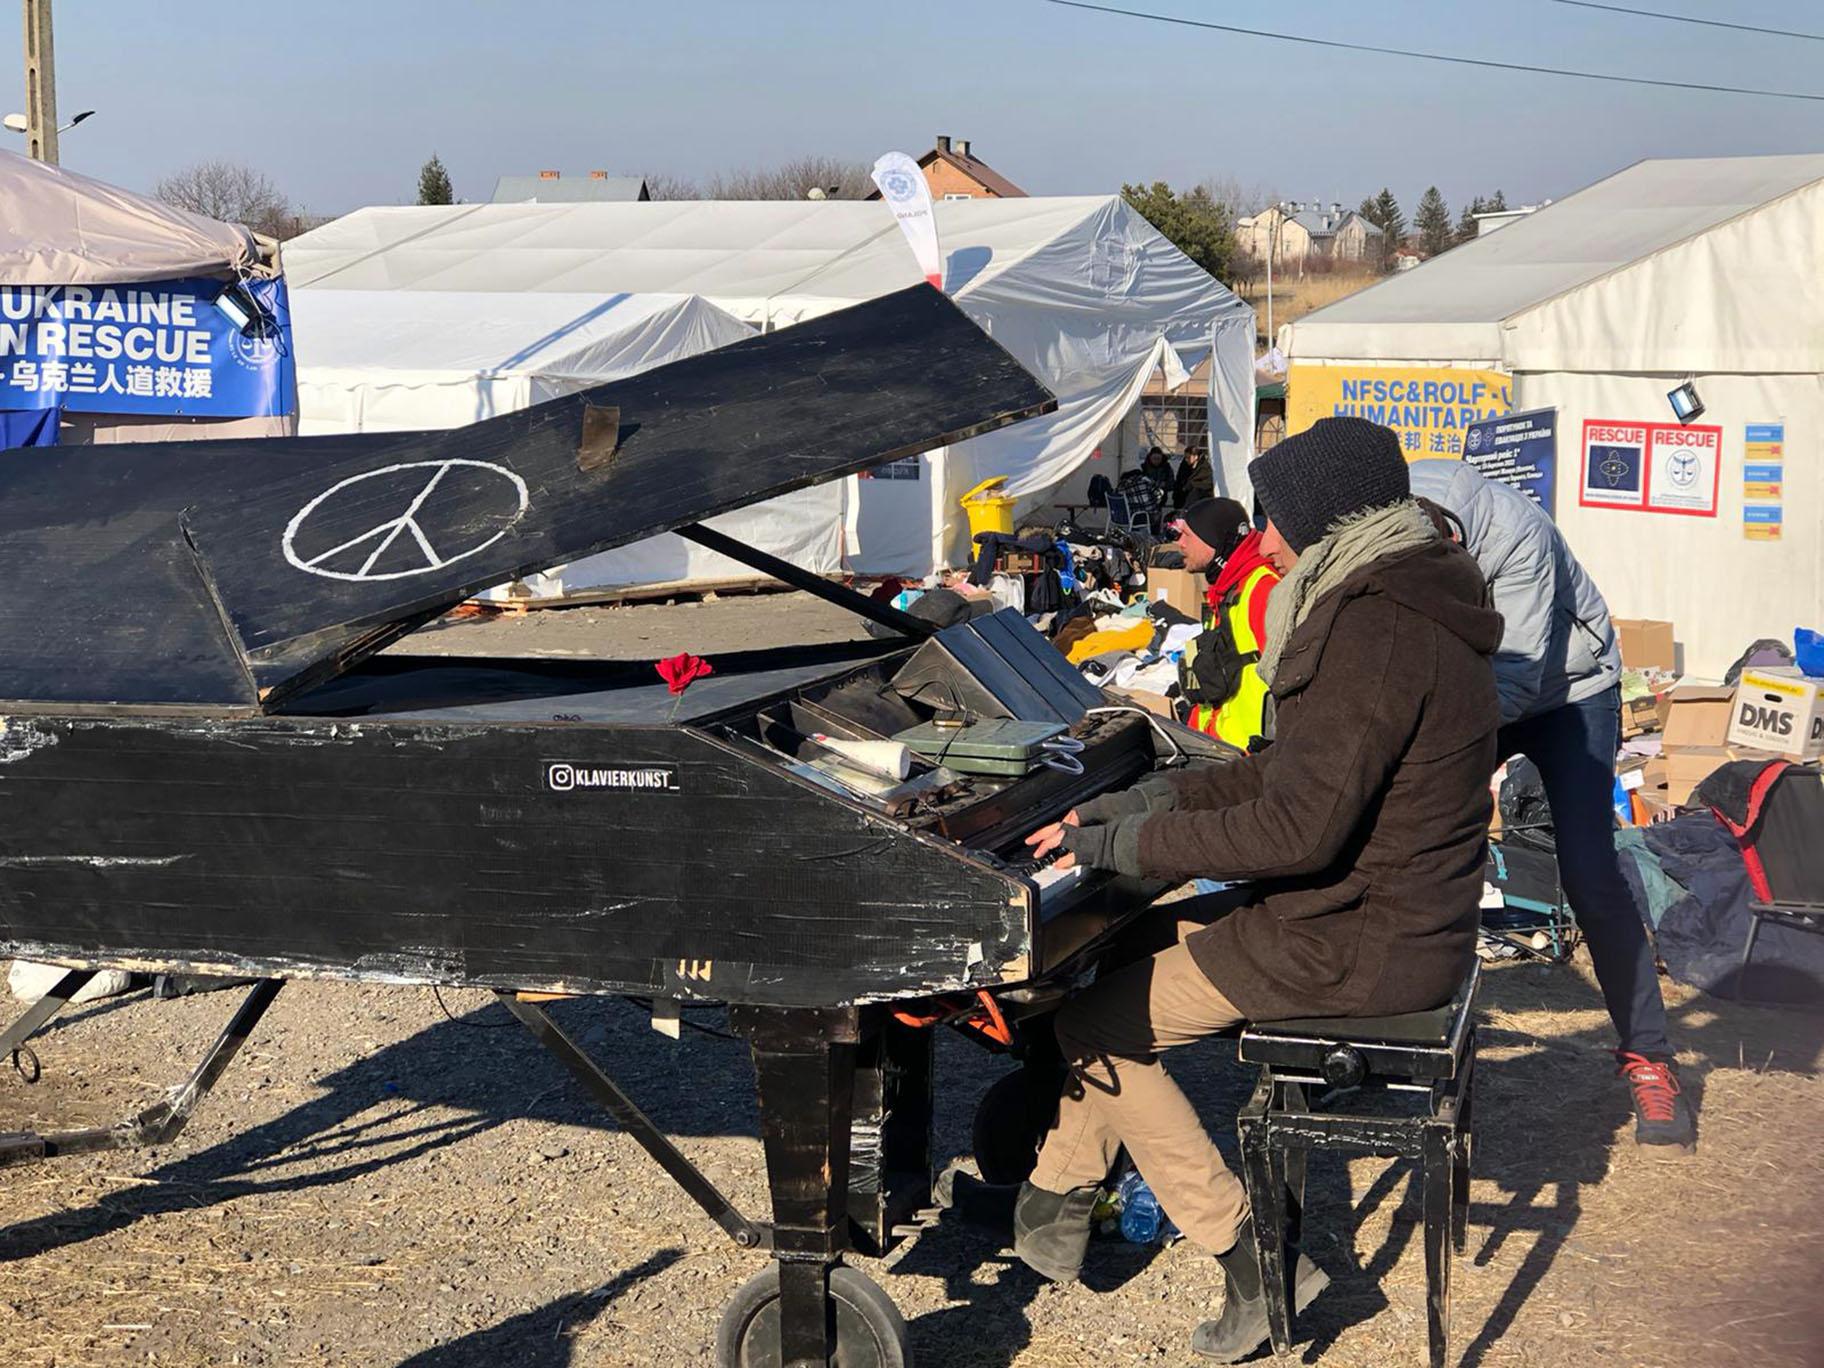 German pianist Davide Martello plays piano for refugees who are crossing from Ukraine into Poland. (Courtesy Avery Hart & David Shapiro)